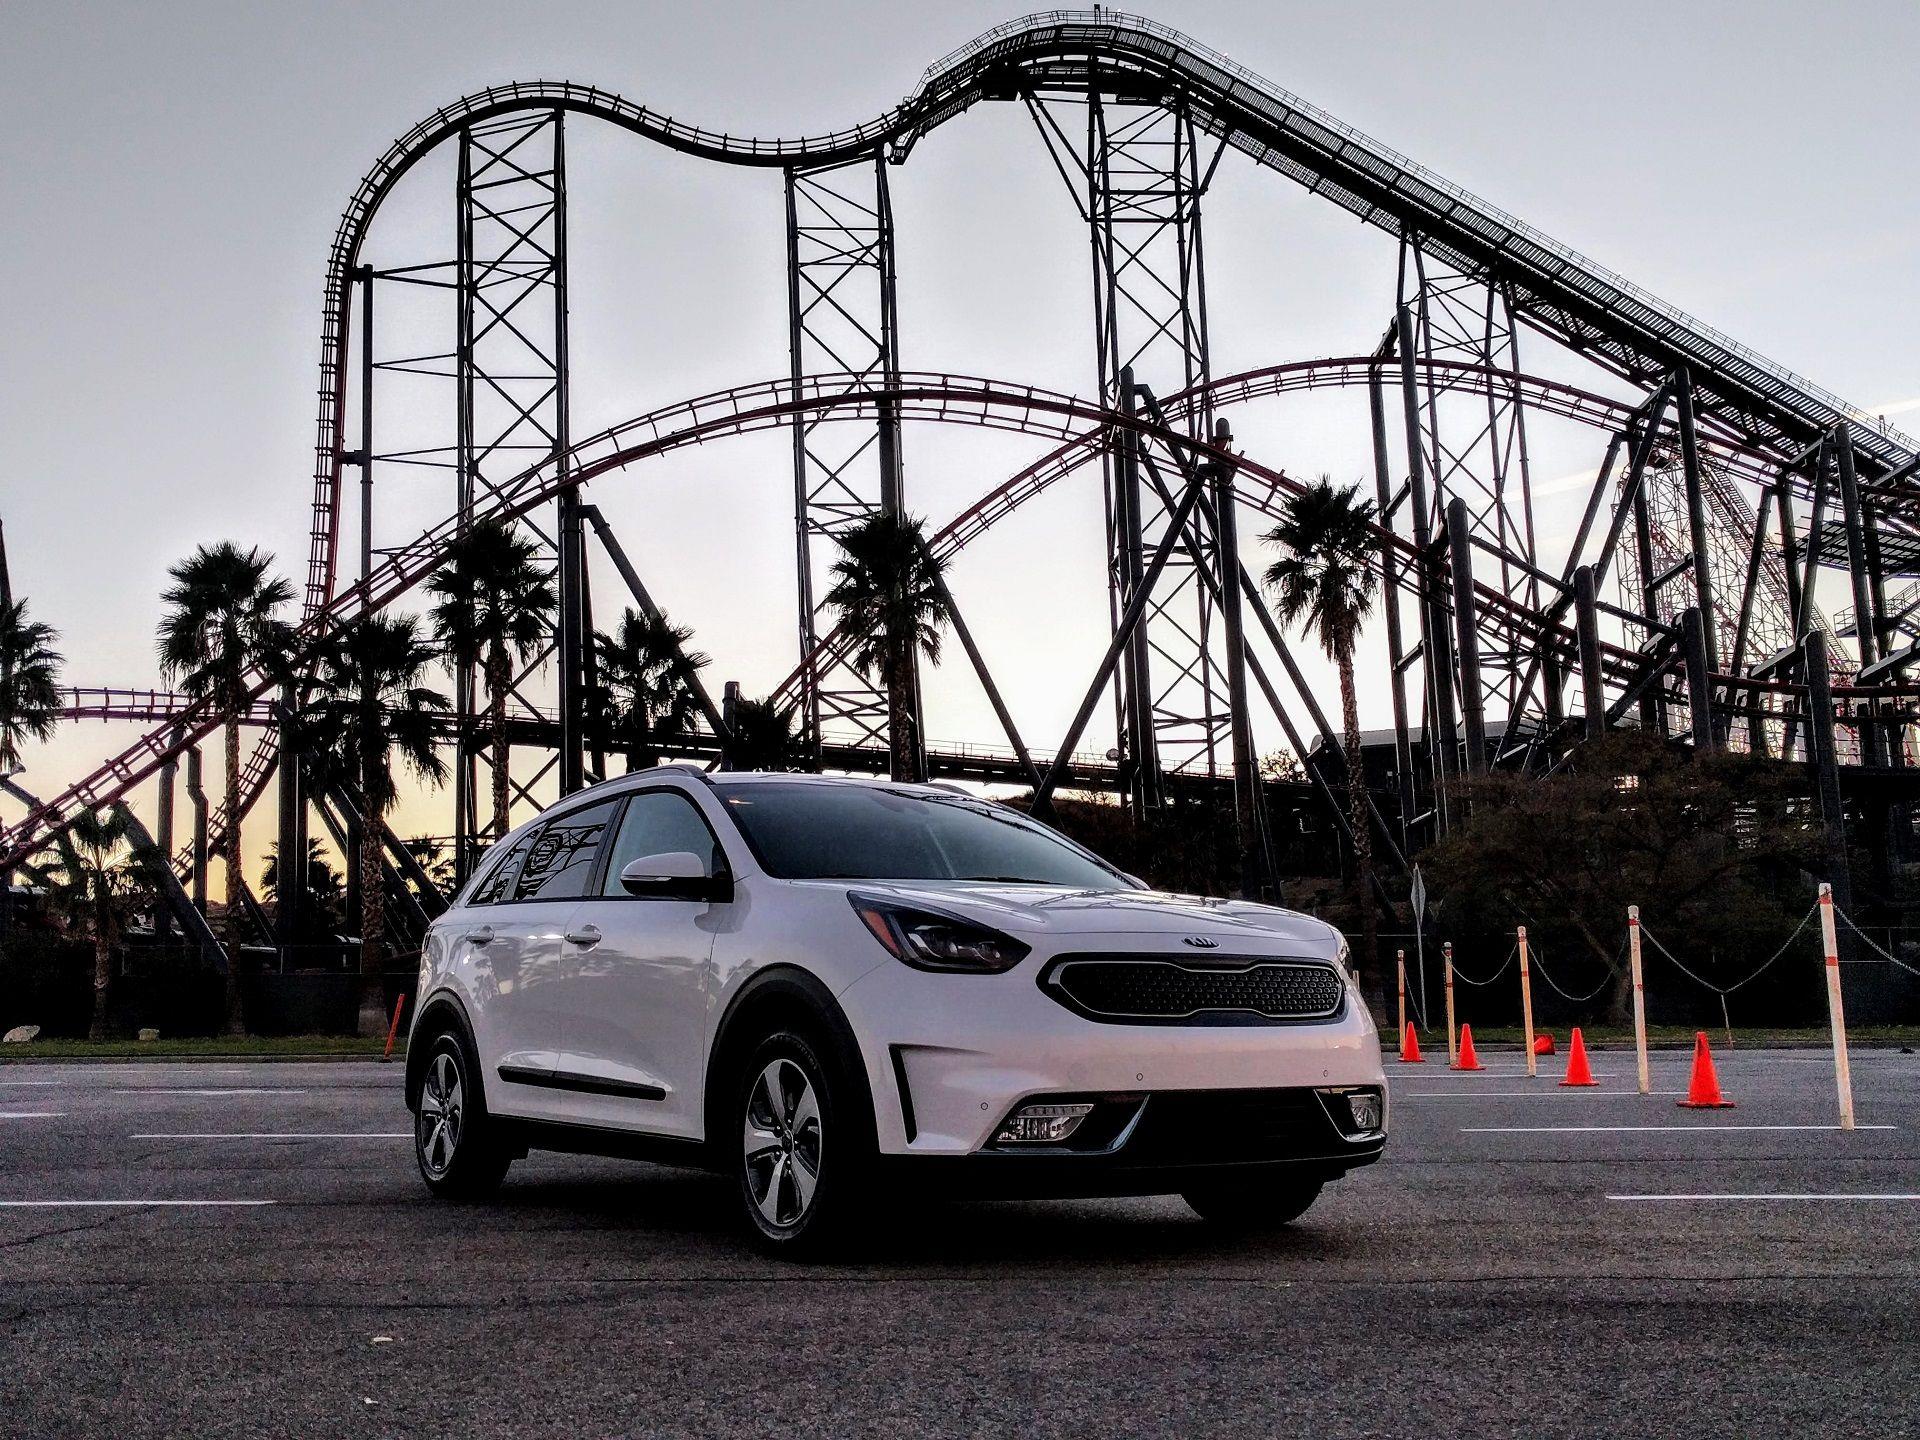 Kia Niro Plug In Hybrid First Drive Review (pricing From $840)